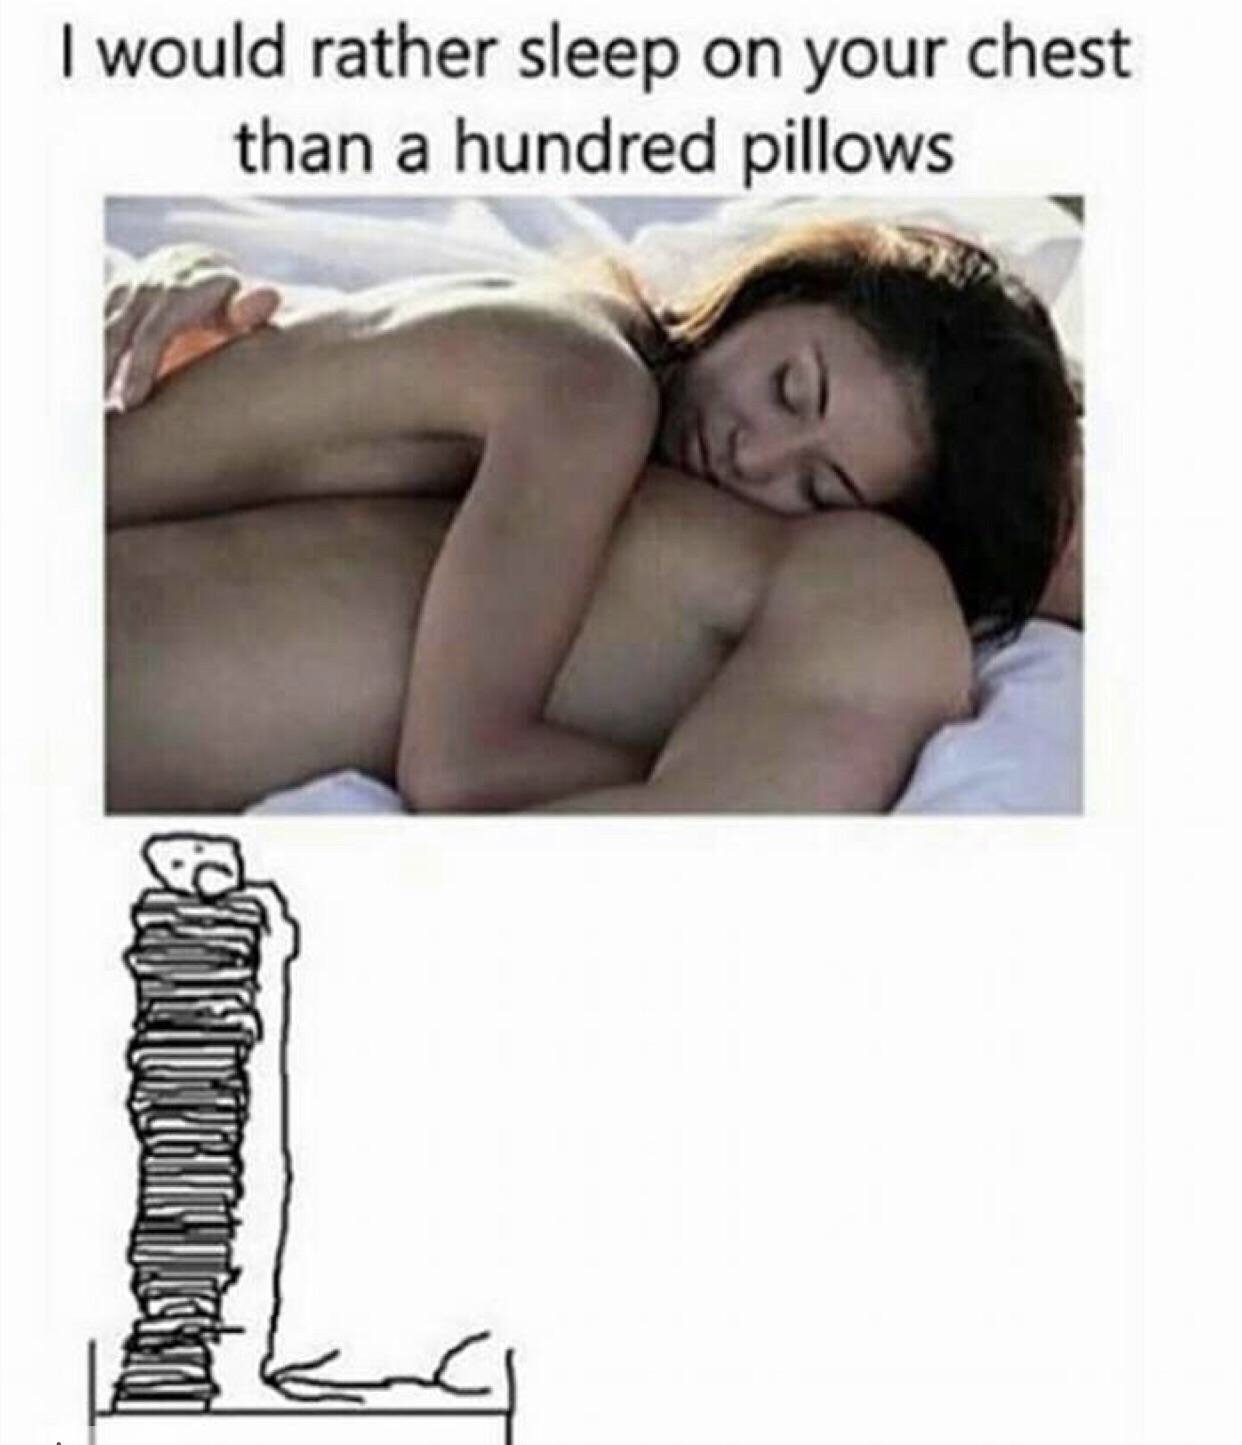 Wednesday meme of woman wanting to sleep on his chest instead of a hundred pillows